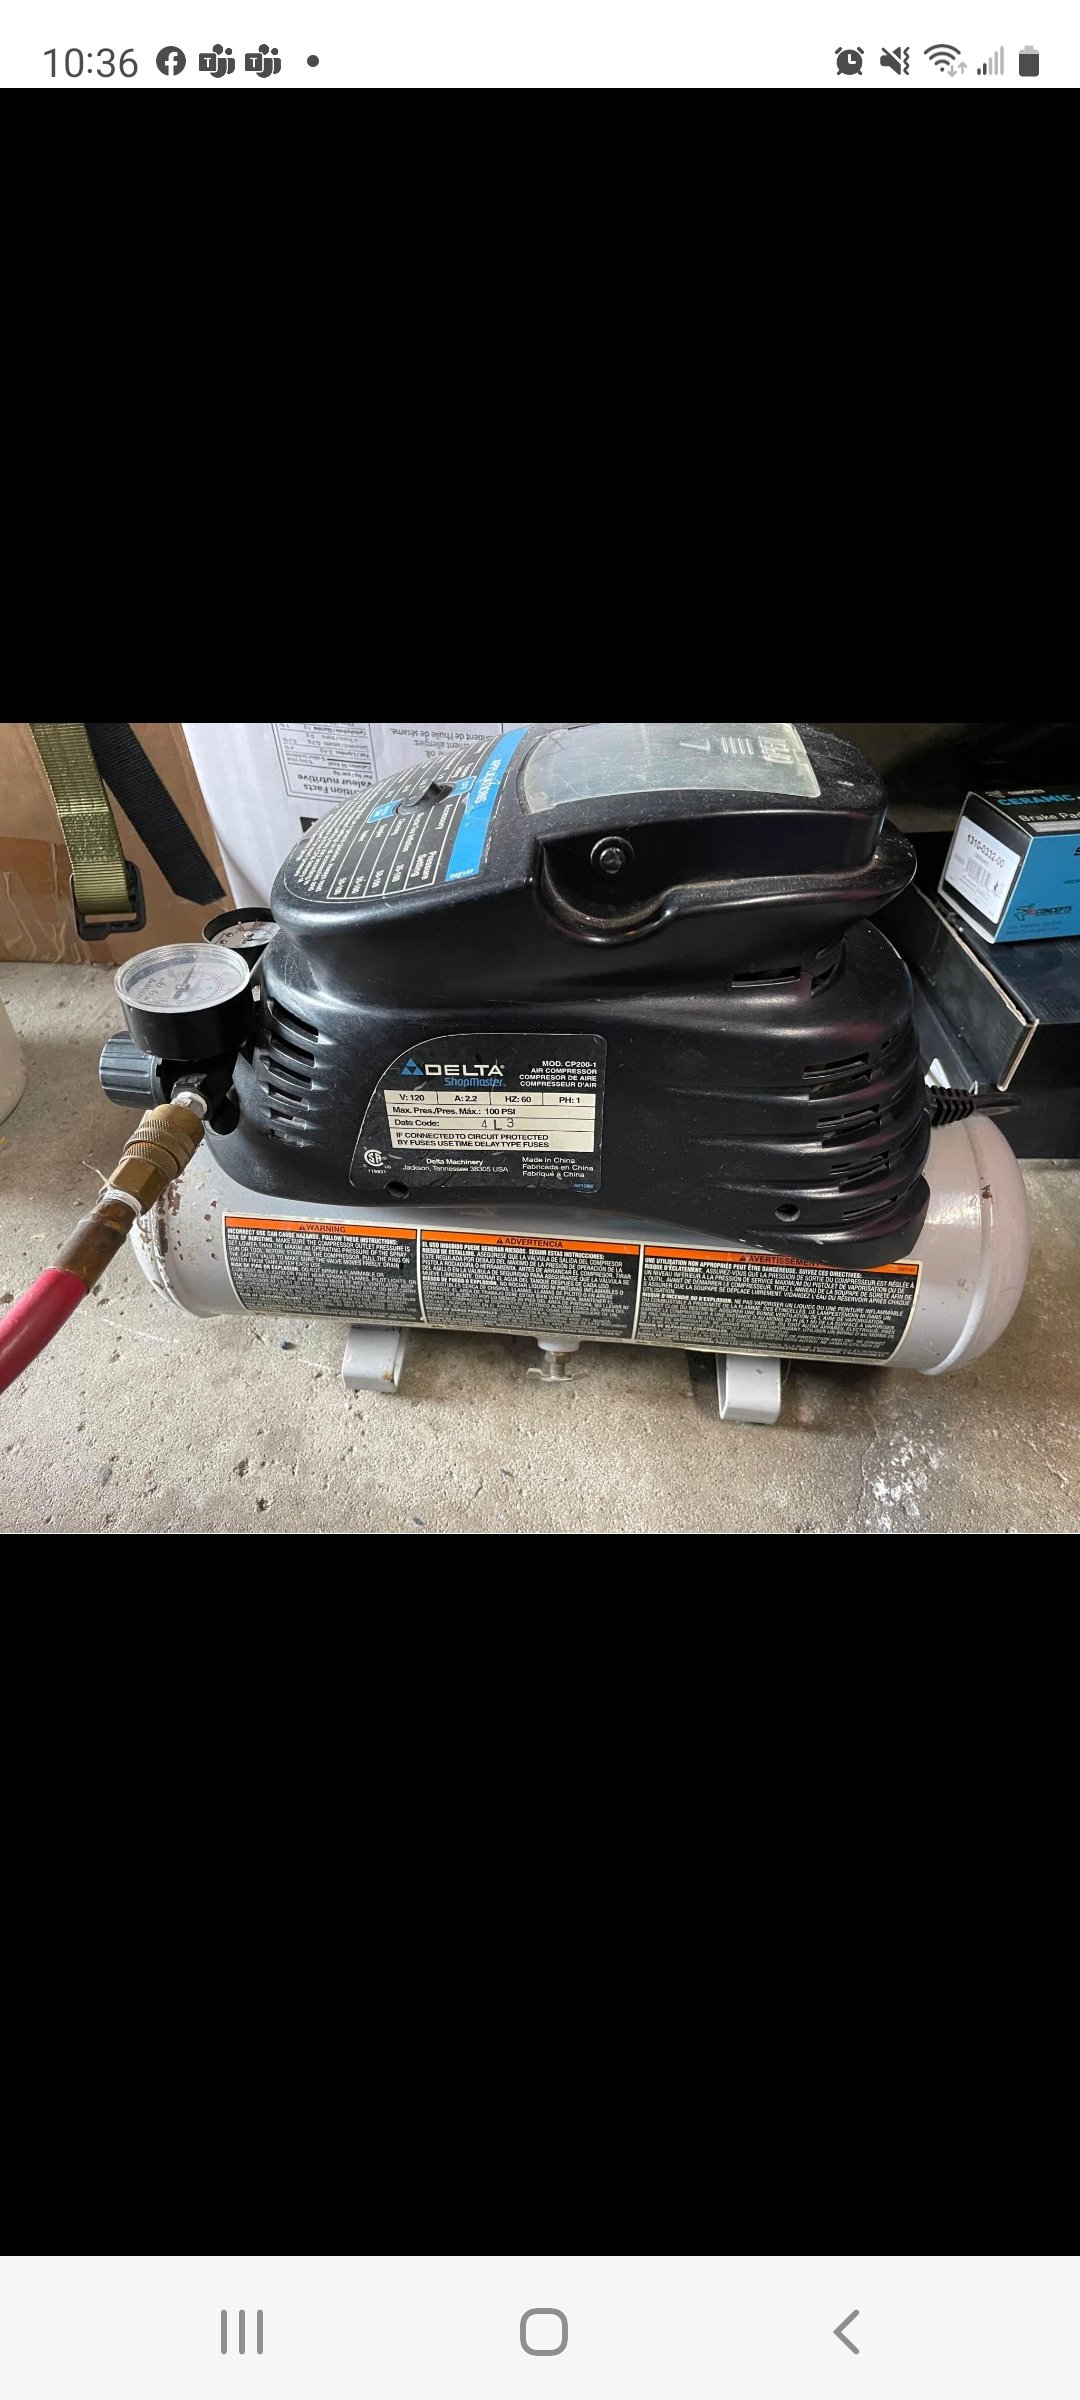 Help please! I just got a new compressor for my airbrush (have an